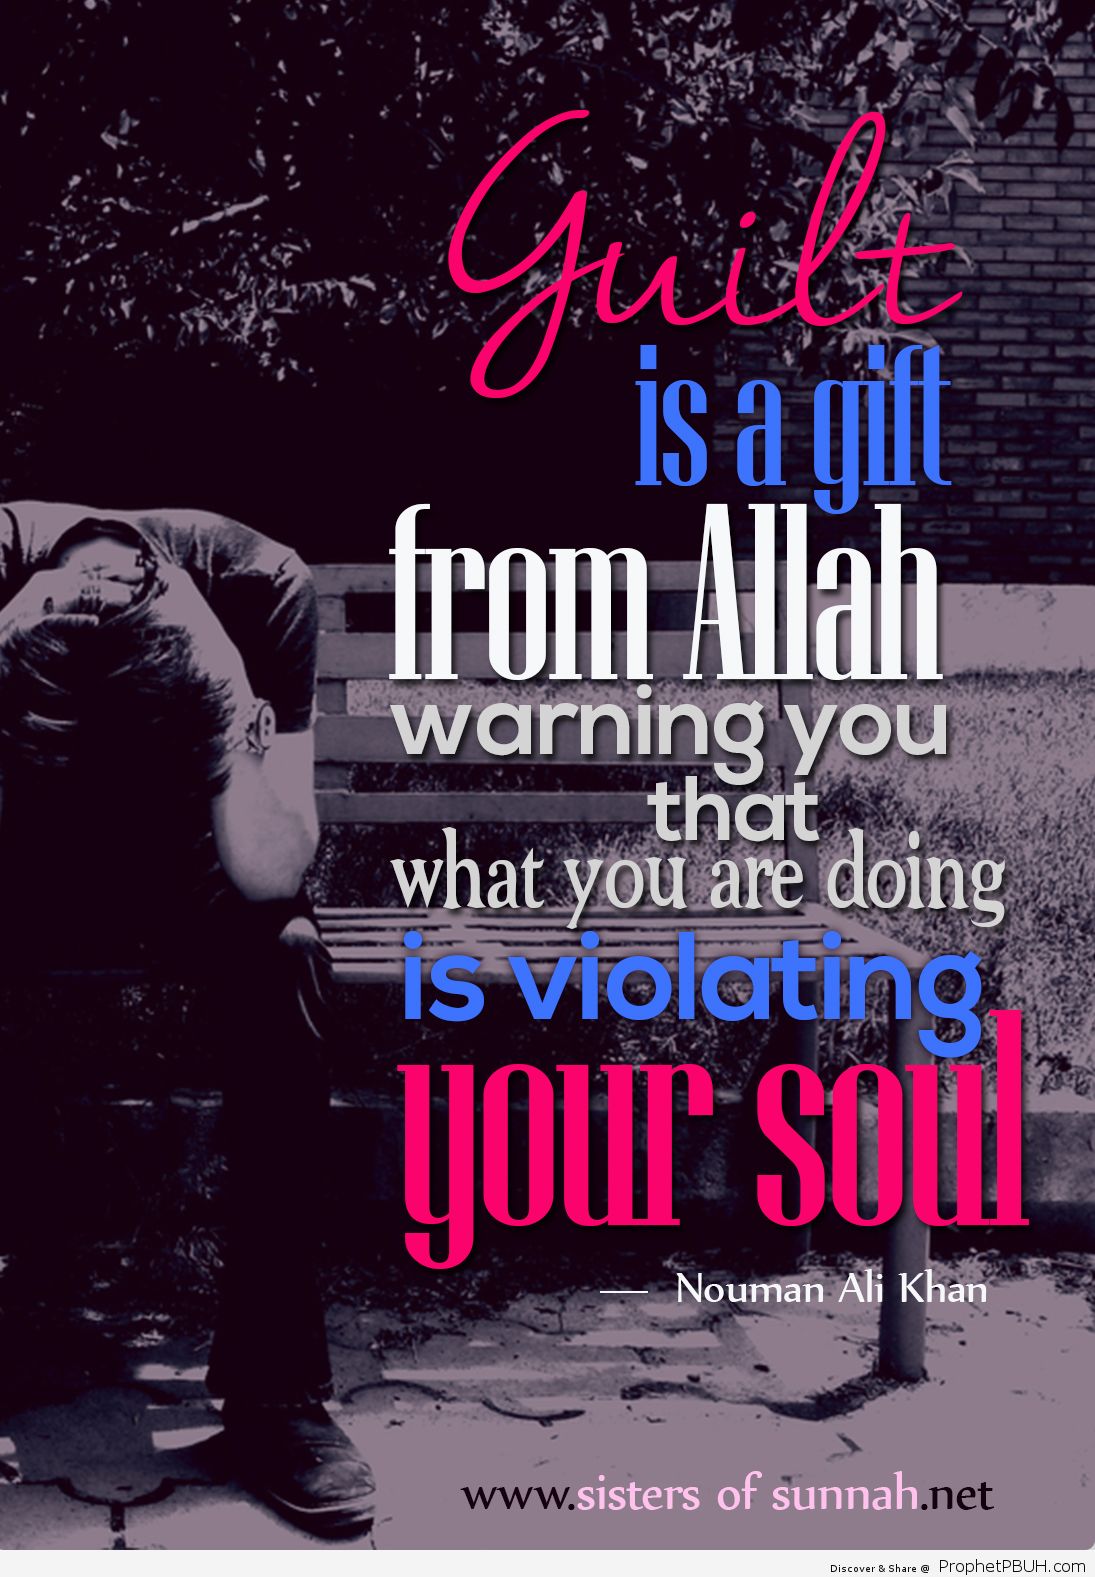 Guilt is a gift from Allah warning us that we are wronging our souls